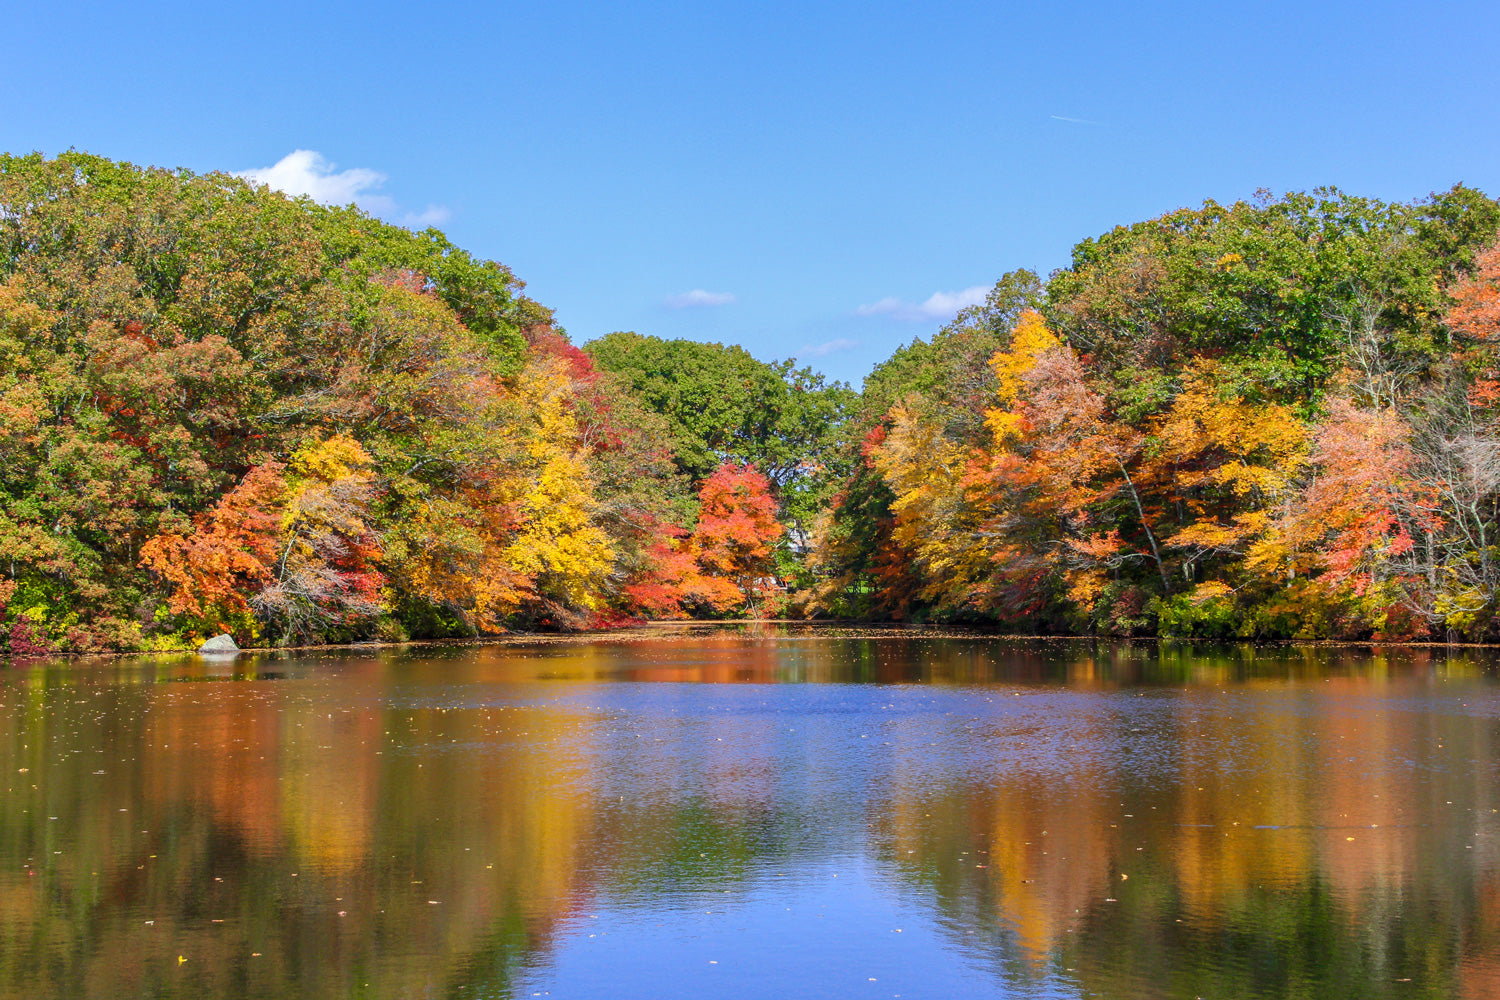 Fall foilage viewed across a lake with blue skies and a reflection in the water